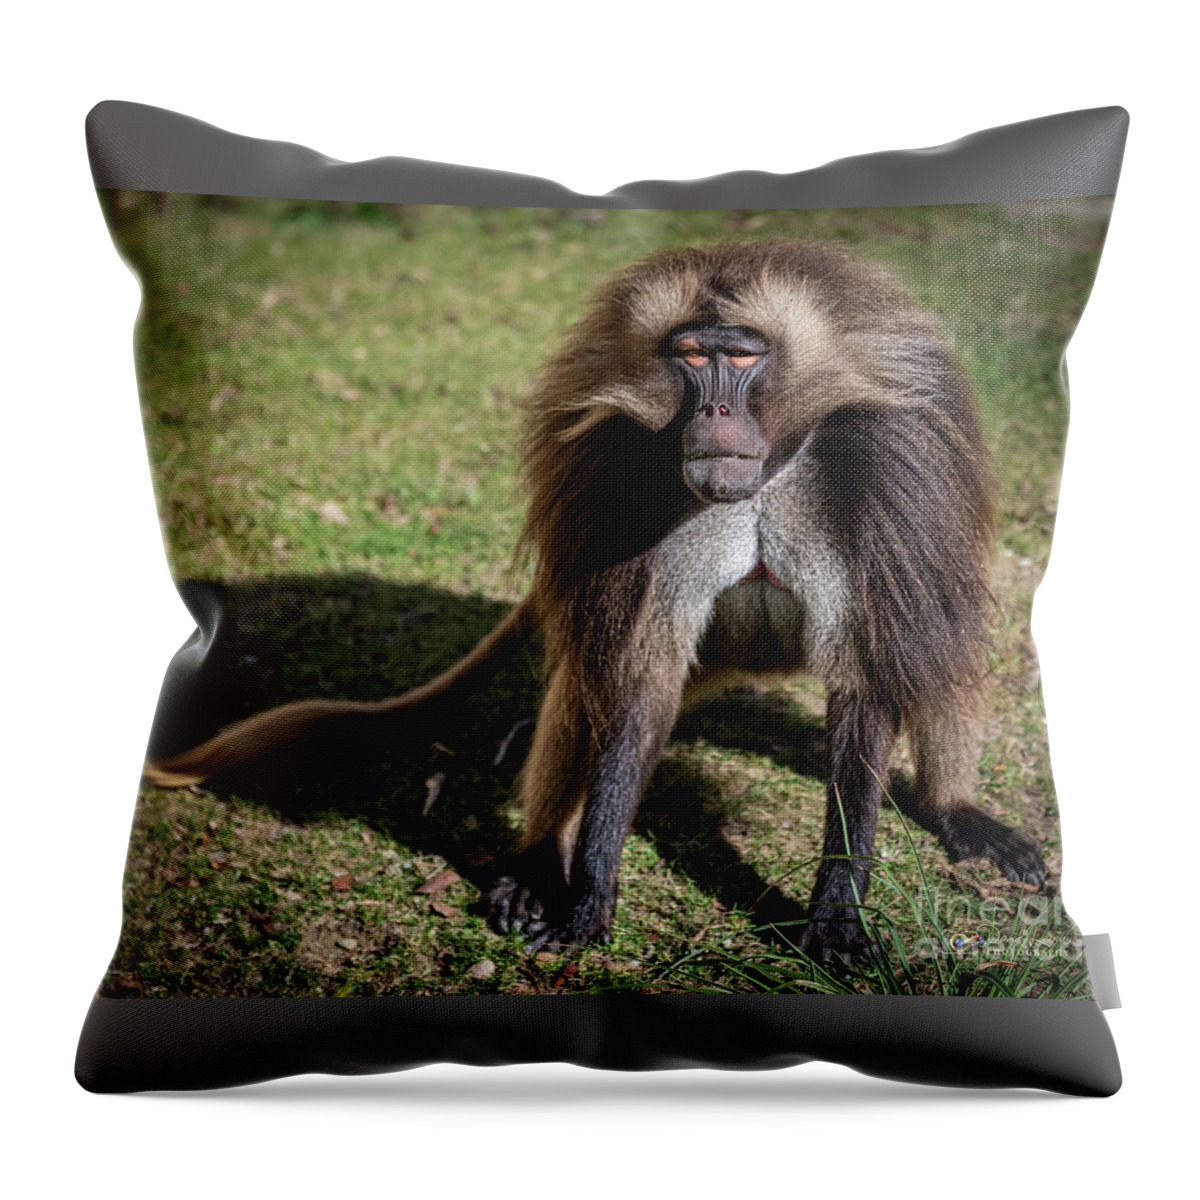 David Levin Photography Throw Pillow featuring the photograph This is How I Look When I'm Happy by David Levin